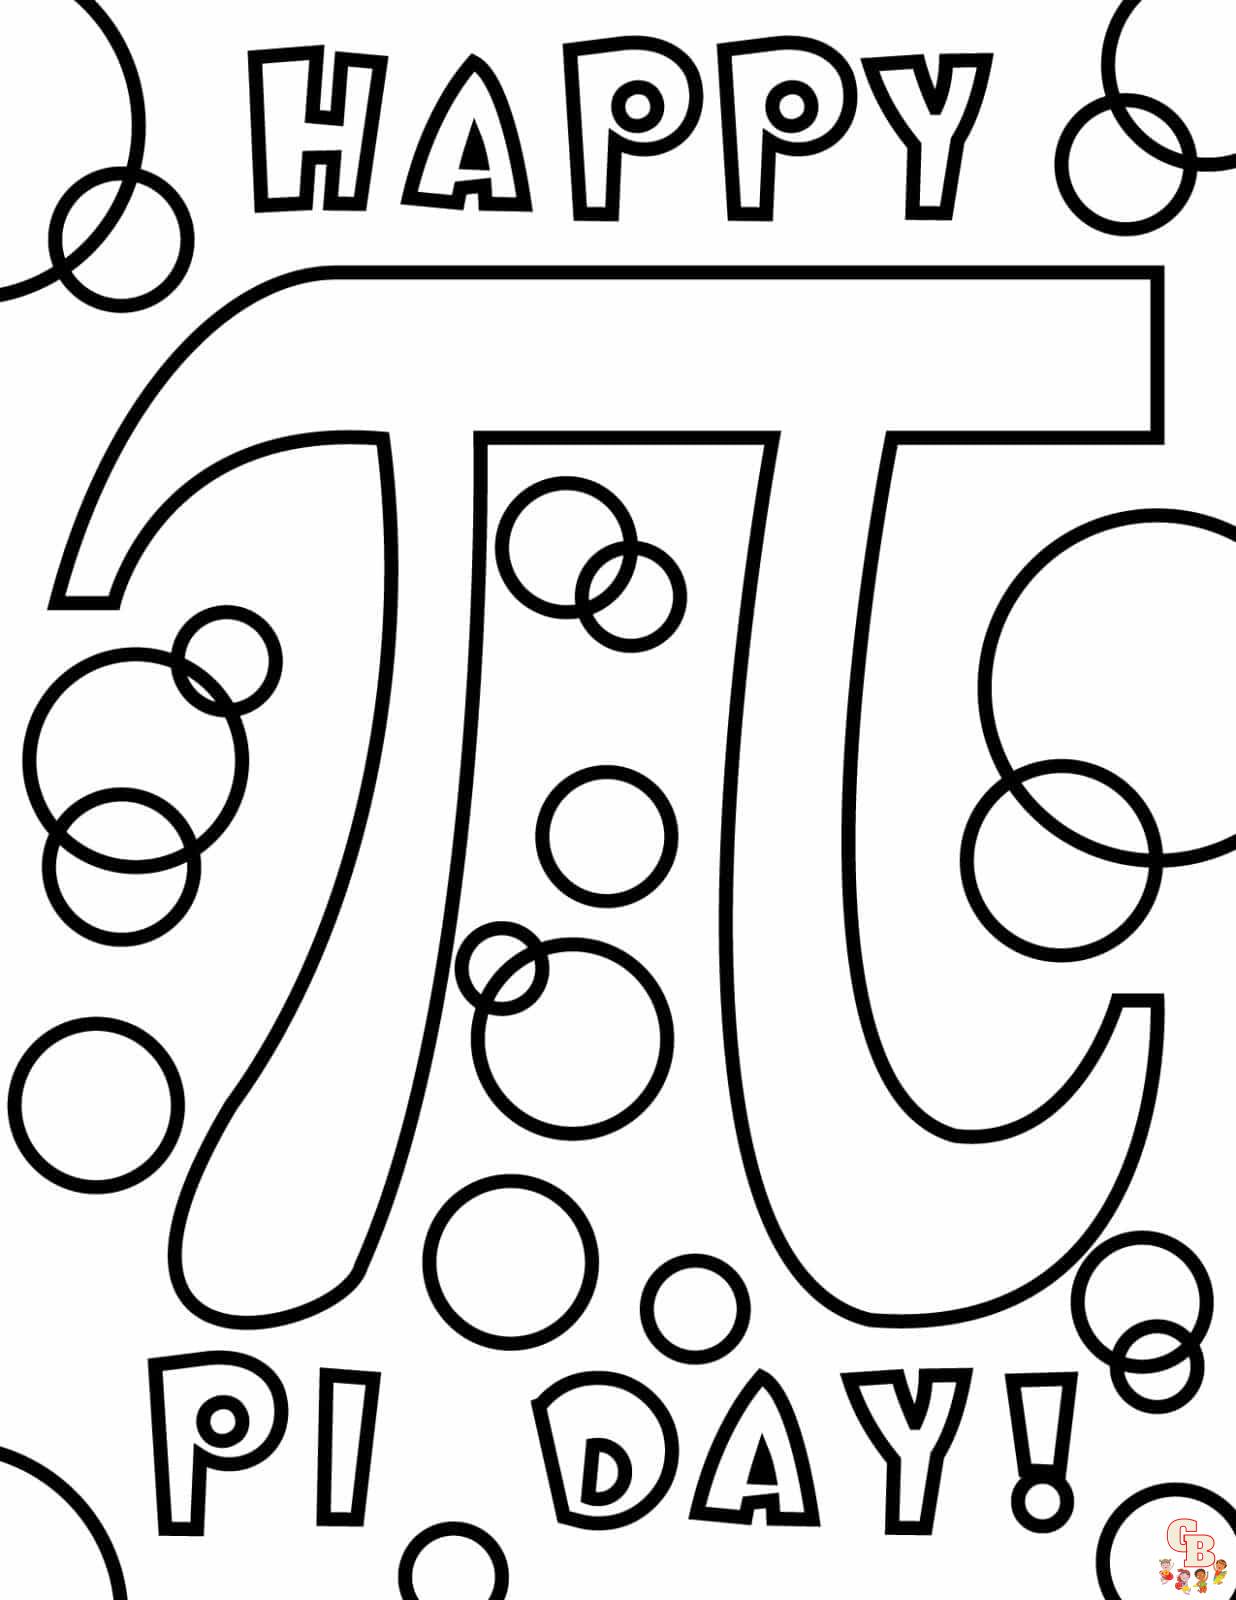 Celebrate pi day with printable coloring pages